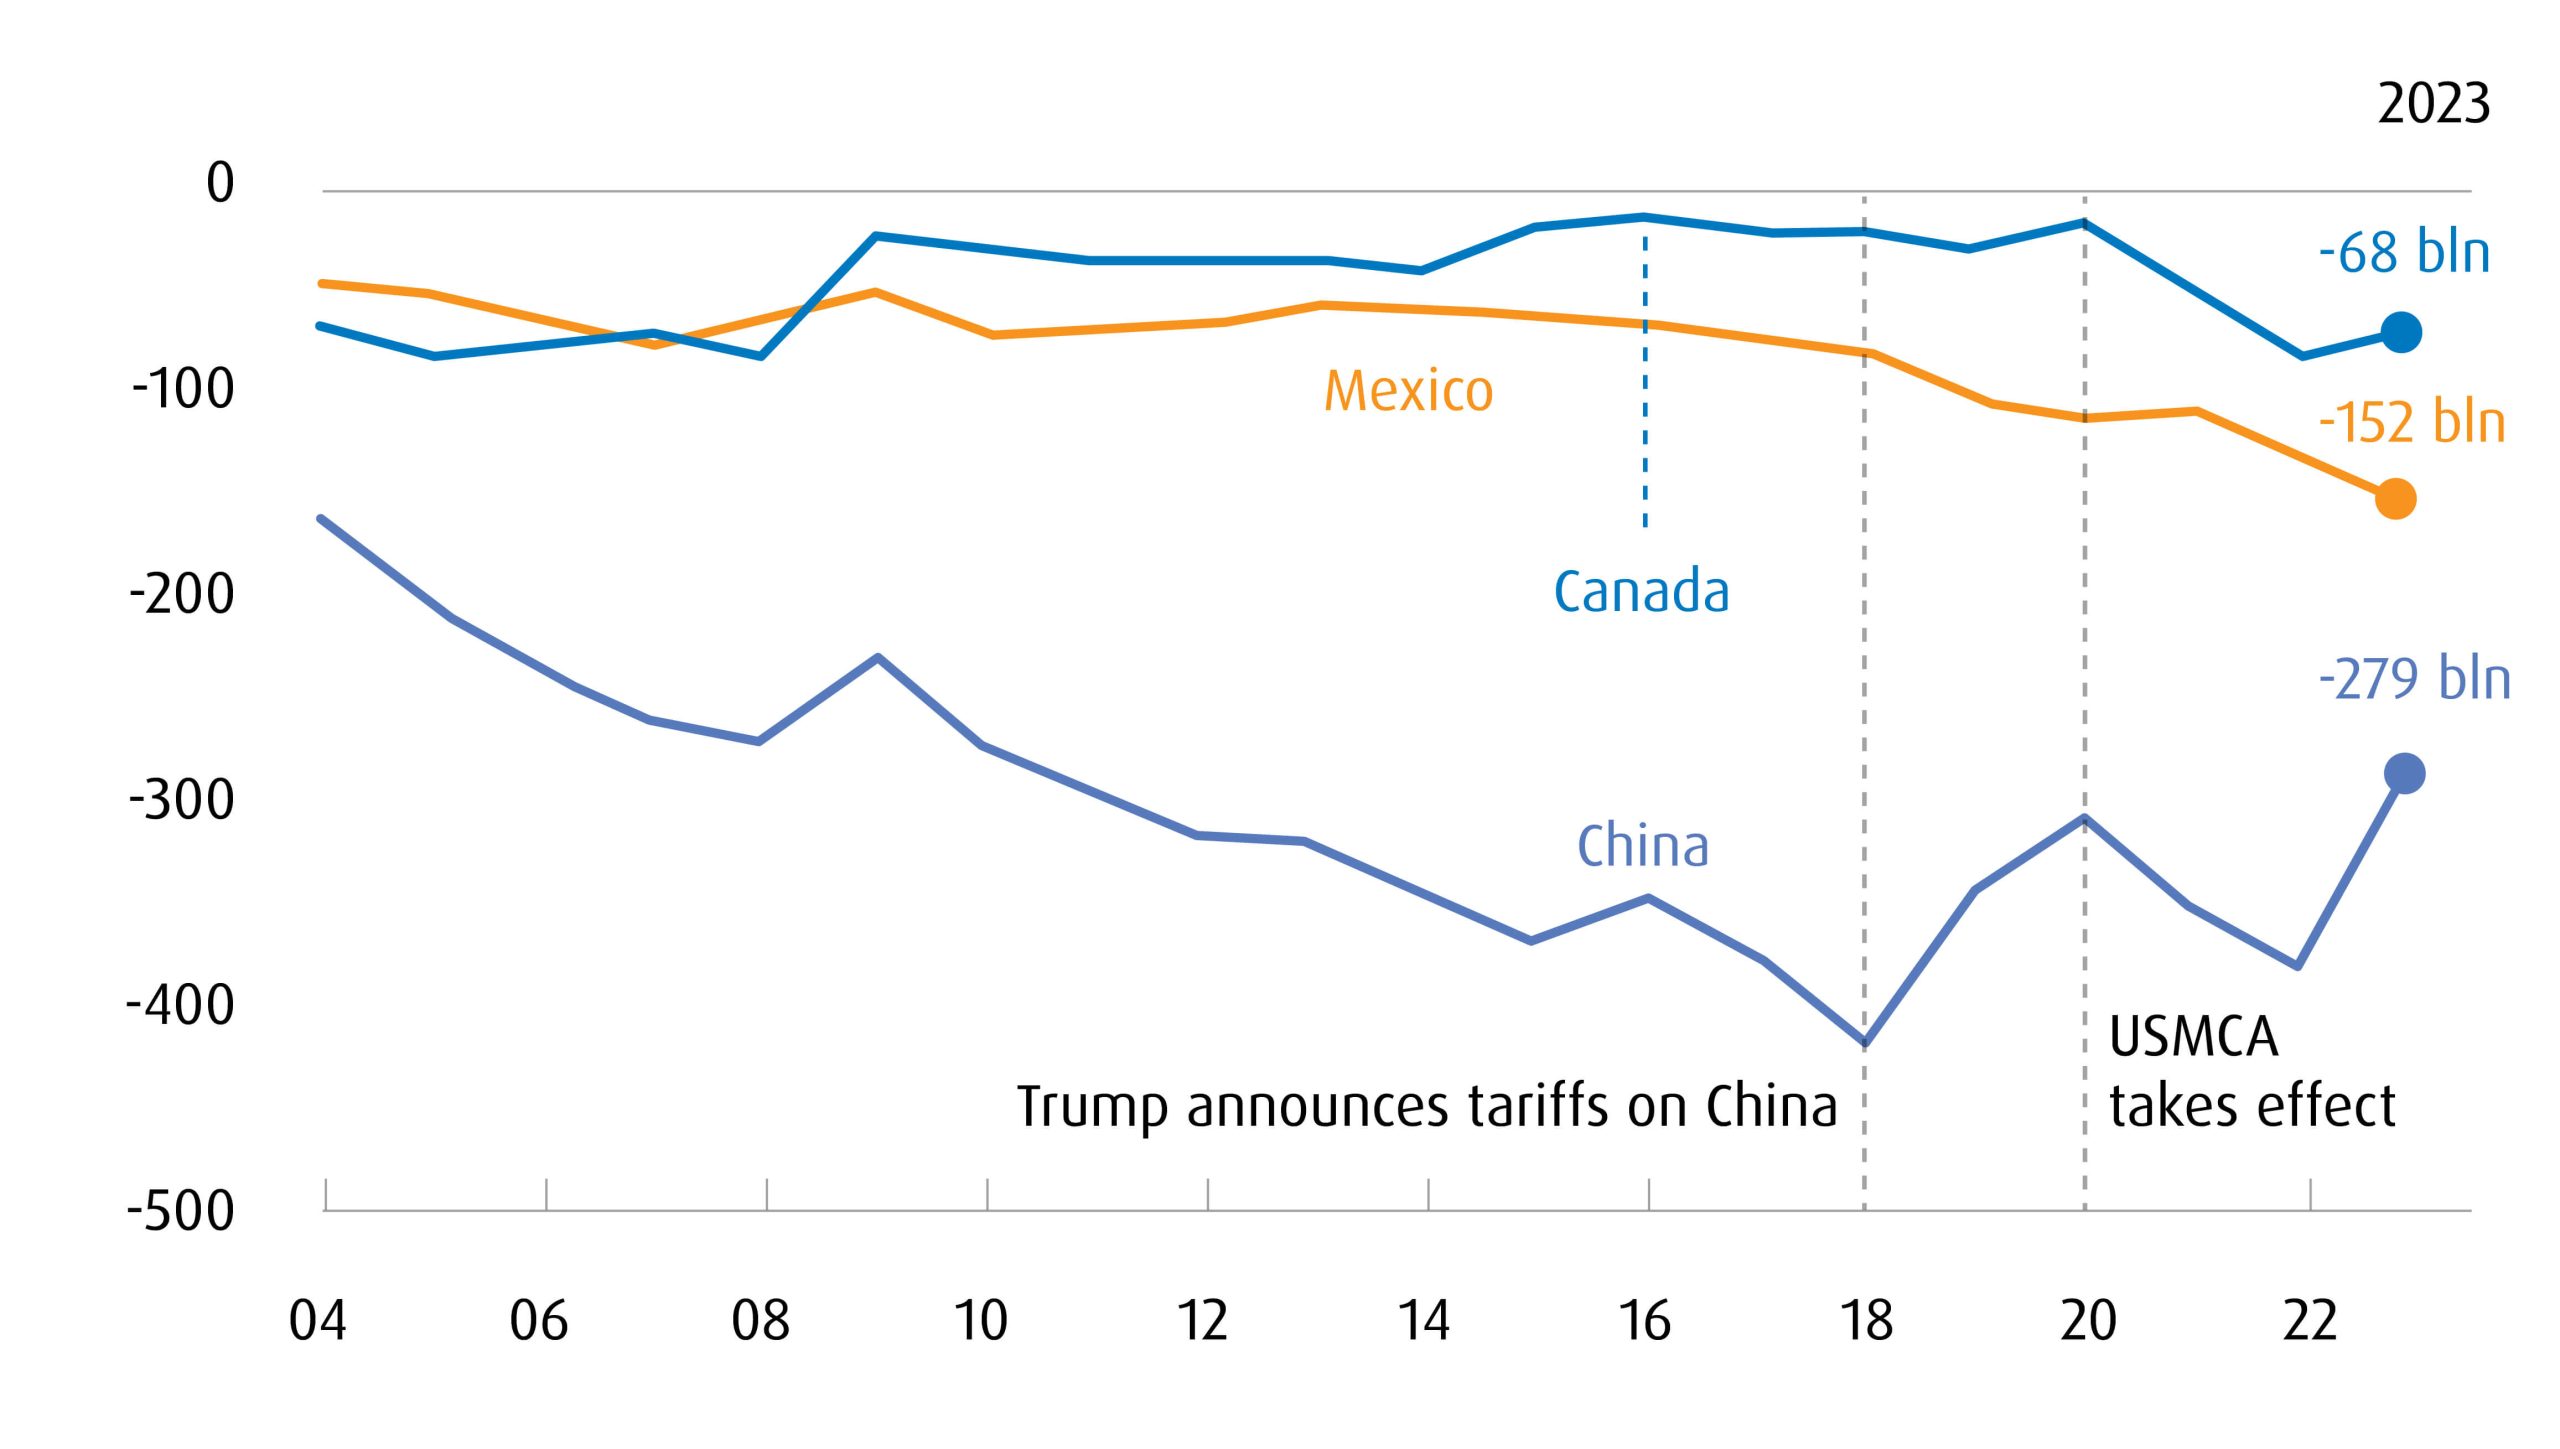 A line graph showing U.S. bilateral goods trade balances with Mexico, Canada, and China since 2004.